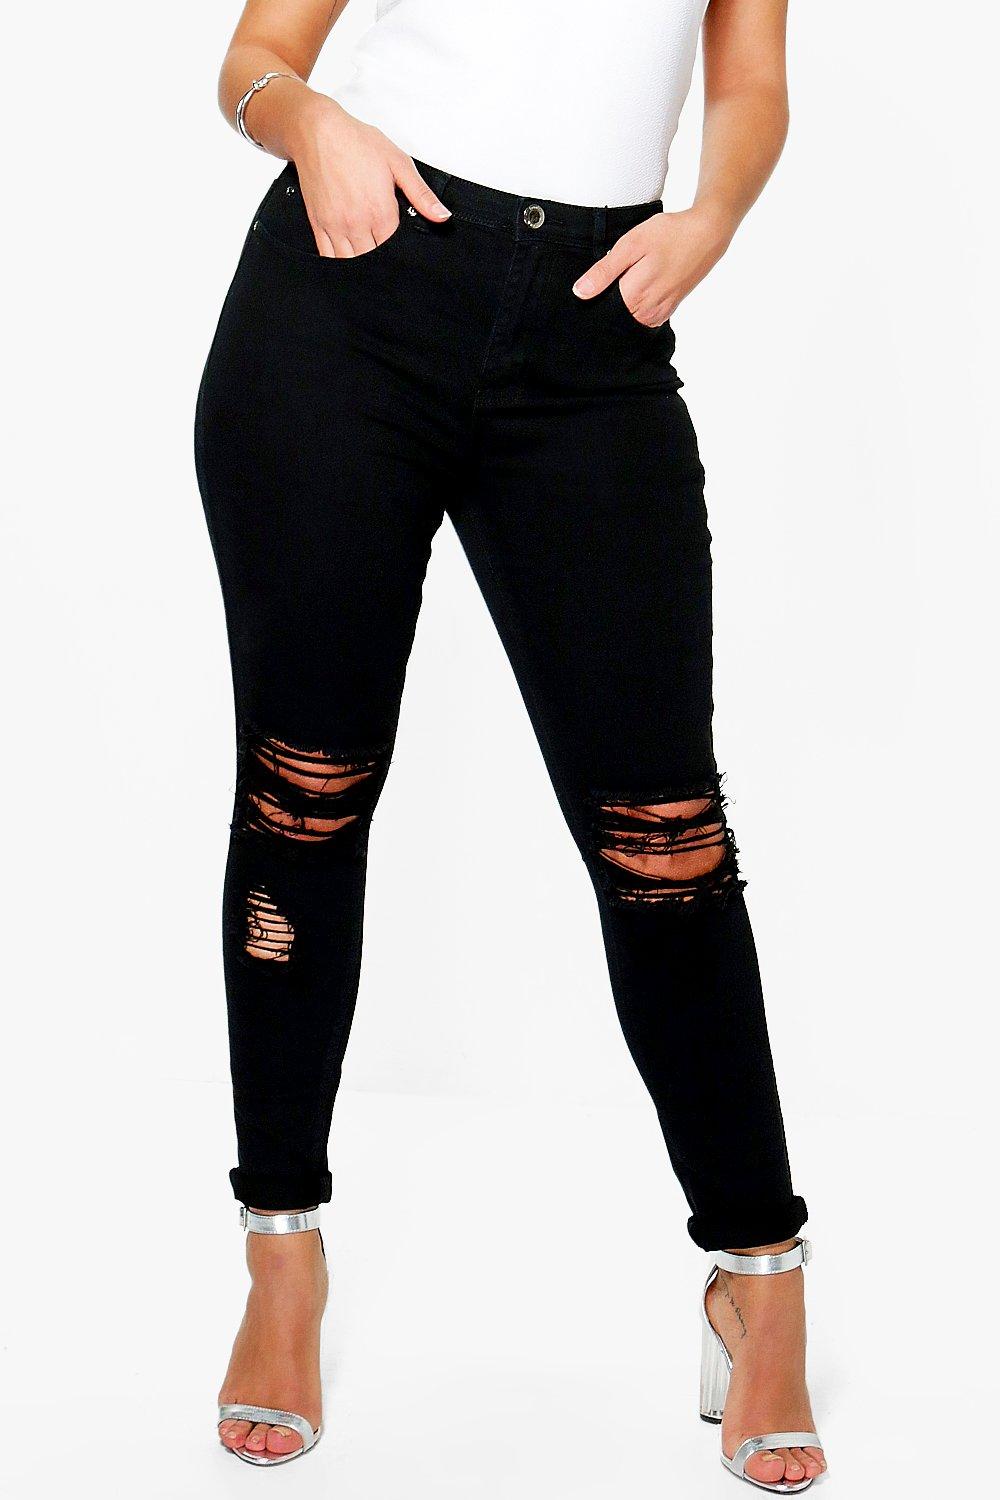 knee ripped black jeans womens